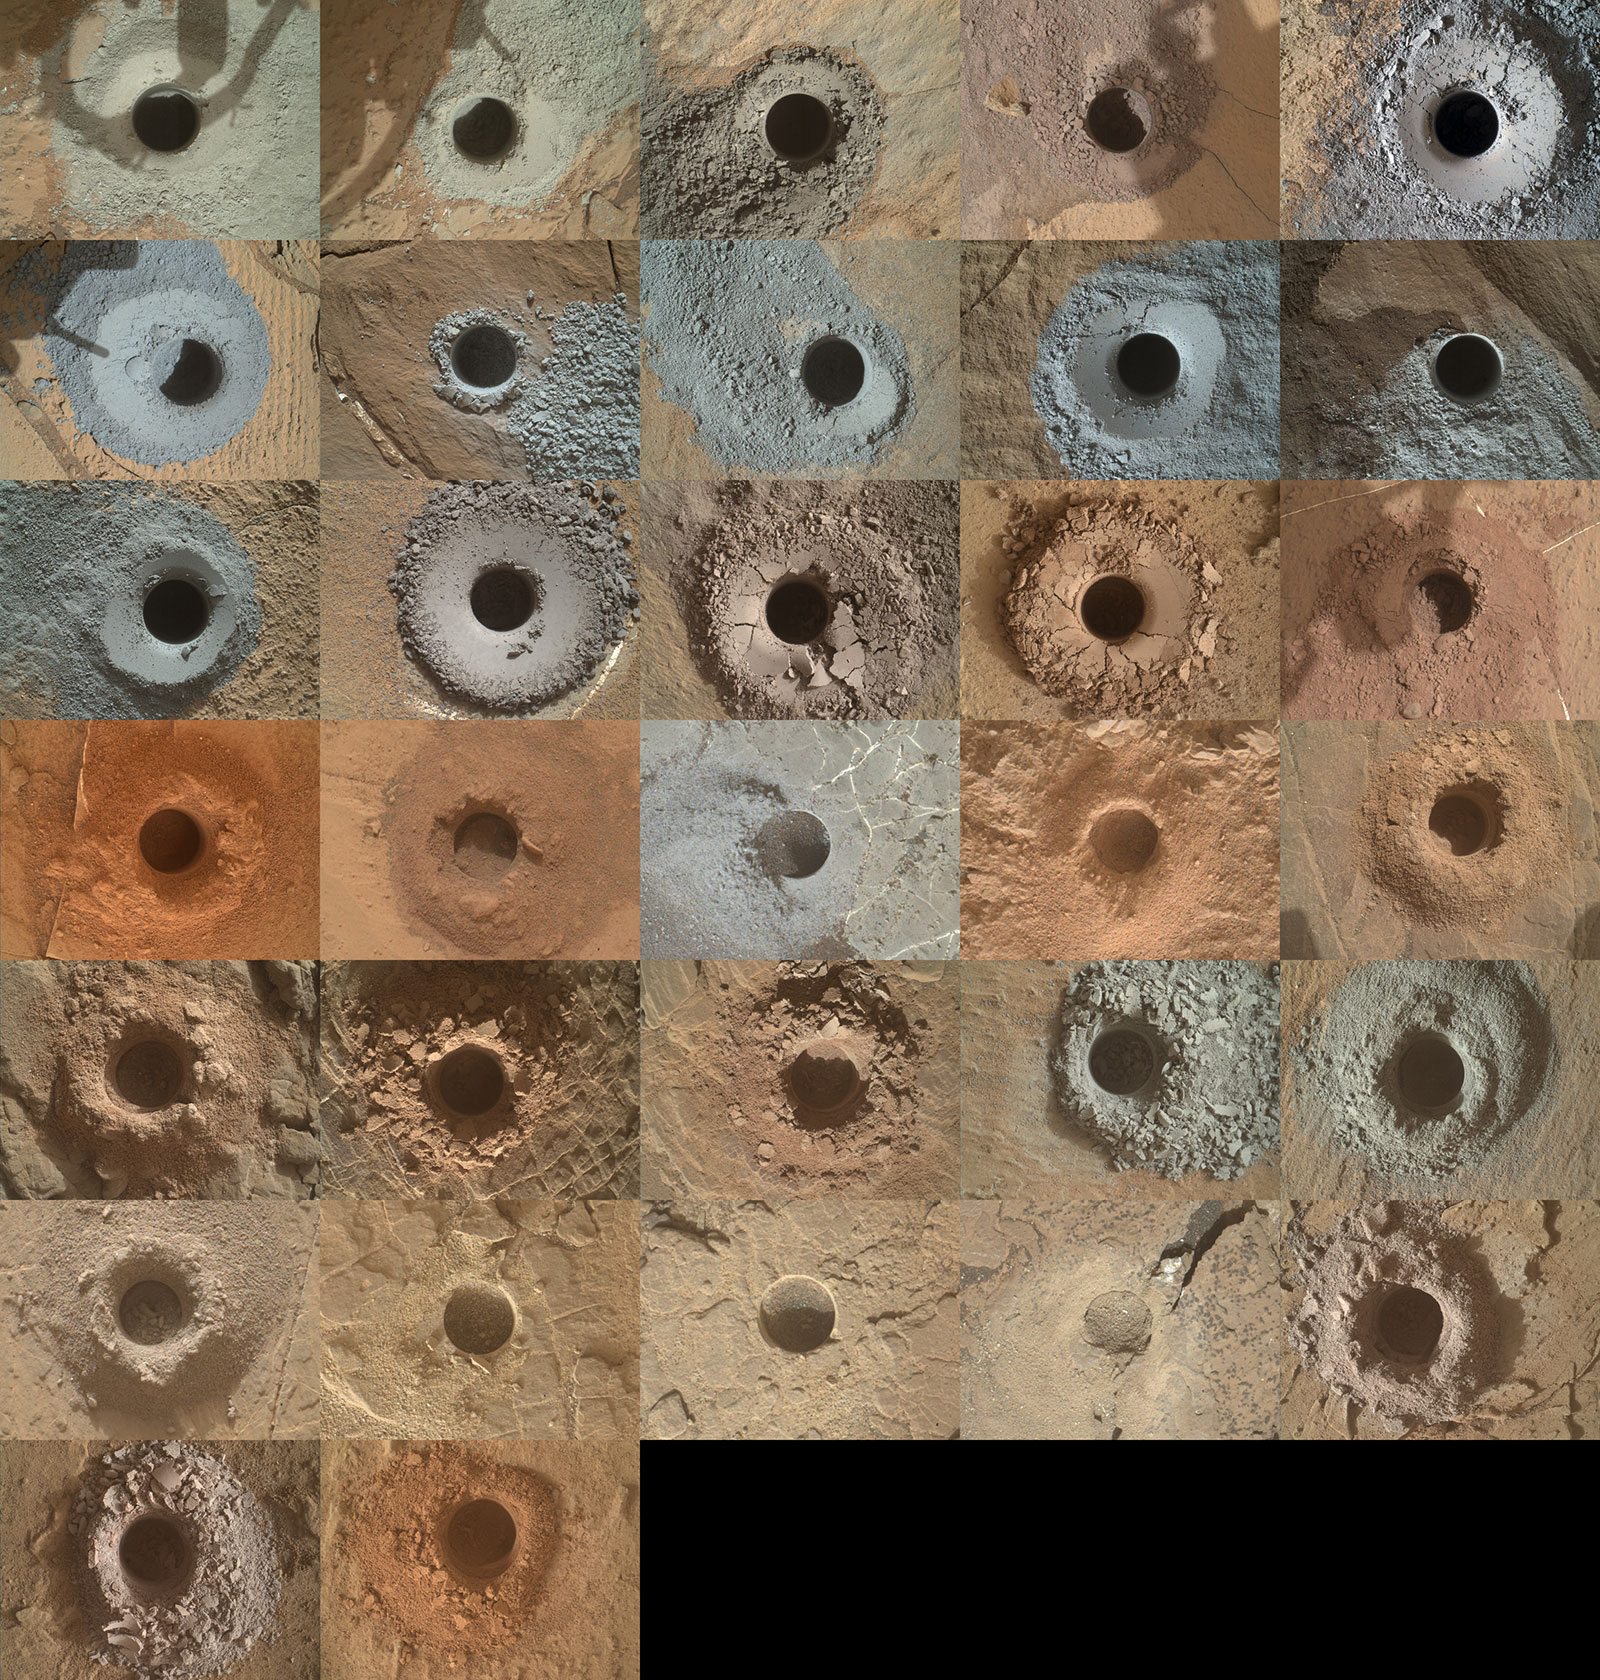 NASA’s Curiosity Mars rover has used the drill on its robotic arm to take 32 rock samples to date. The Mars Hand Lens Imager (MAHLI), a camera on the end of the robotic arm, provided the images in this mosaic.